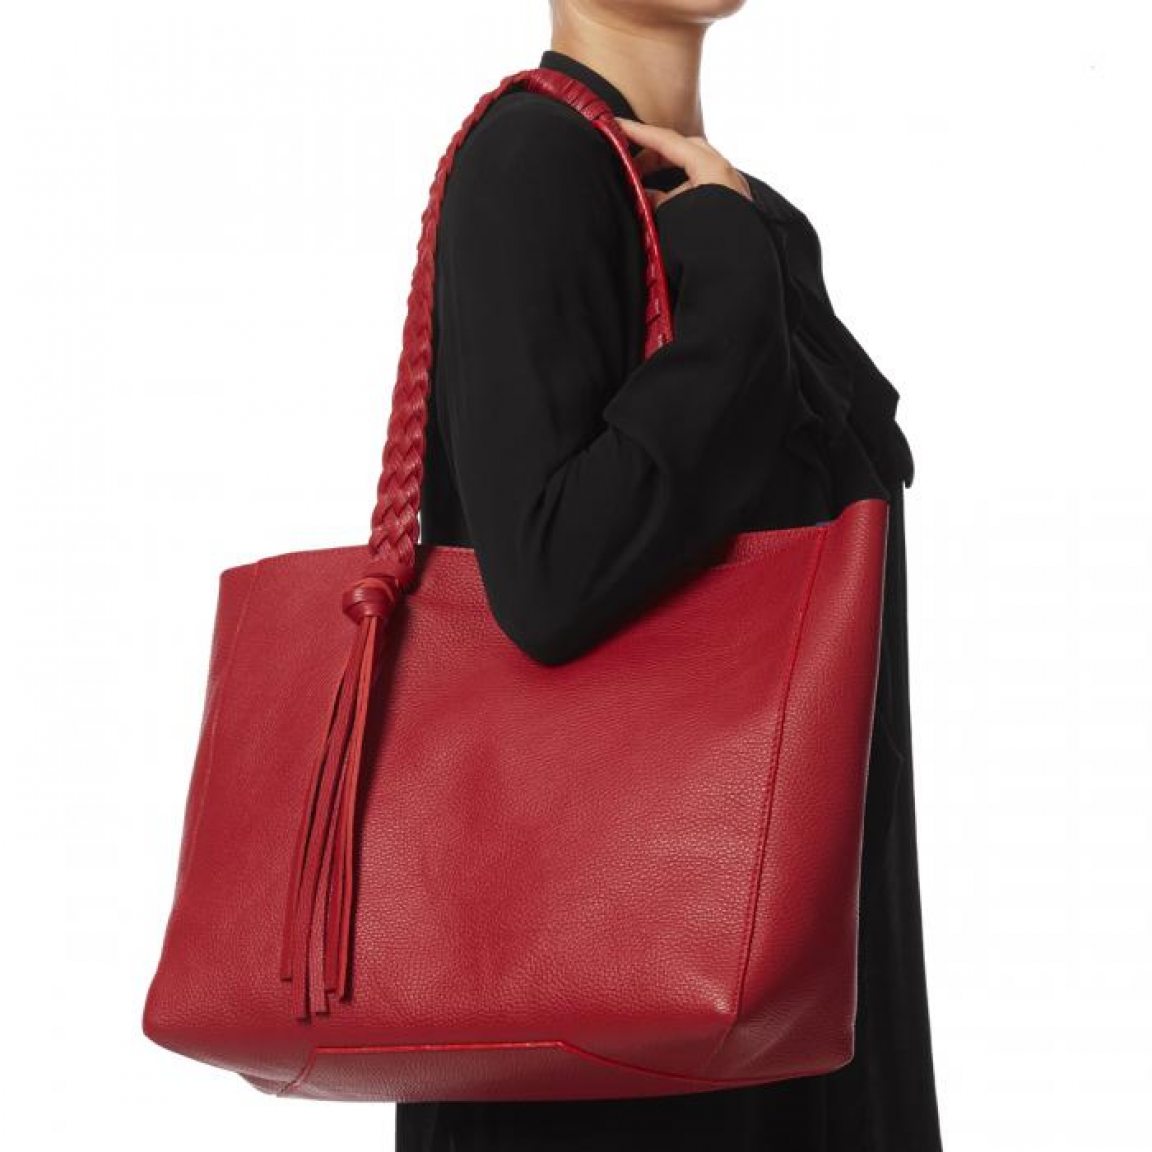 Large red leather tote bag